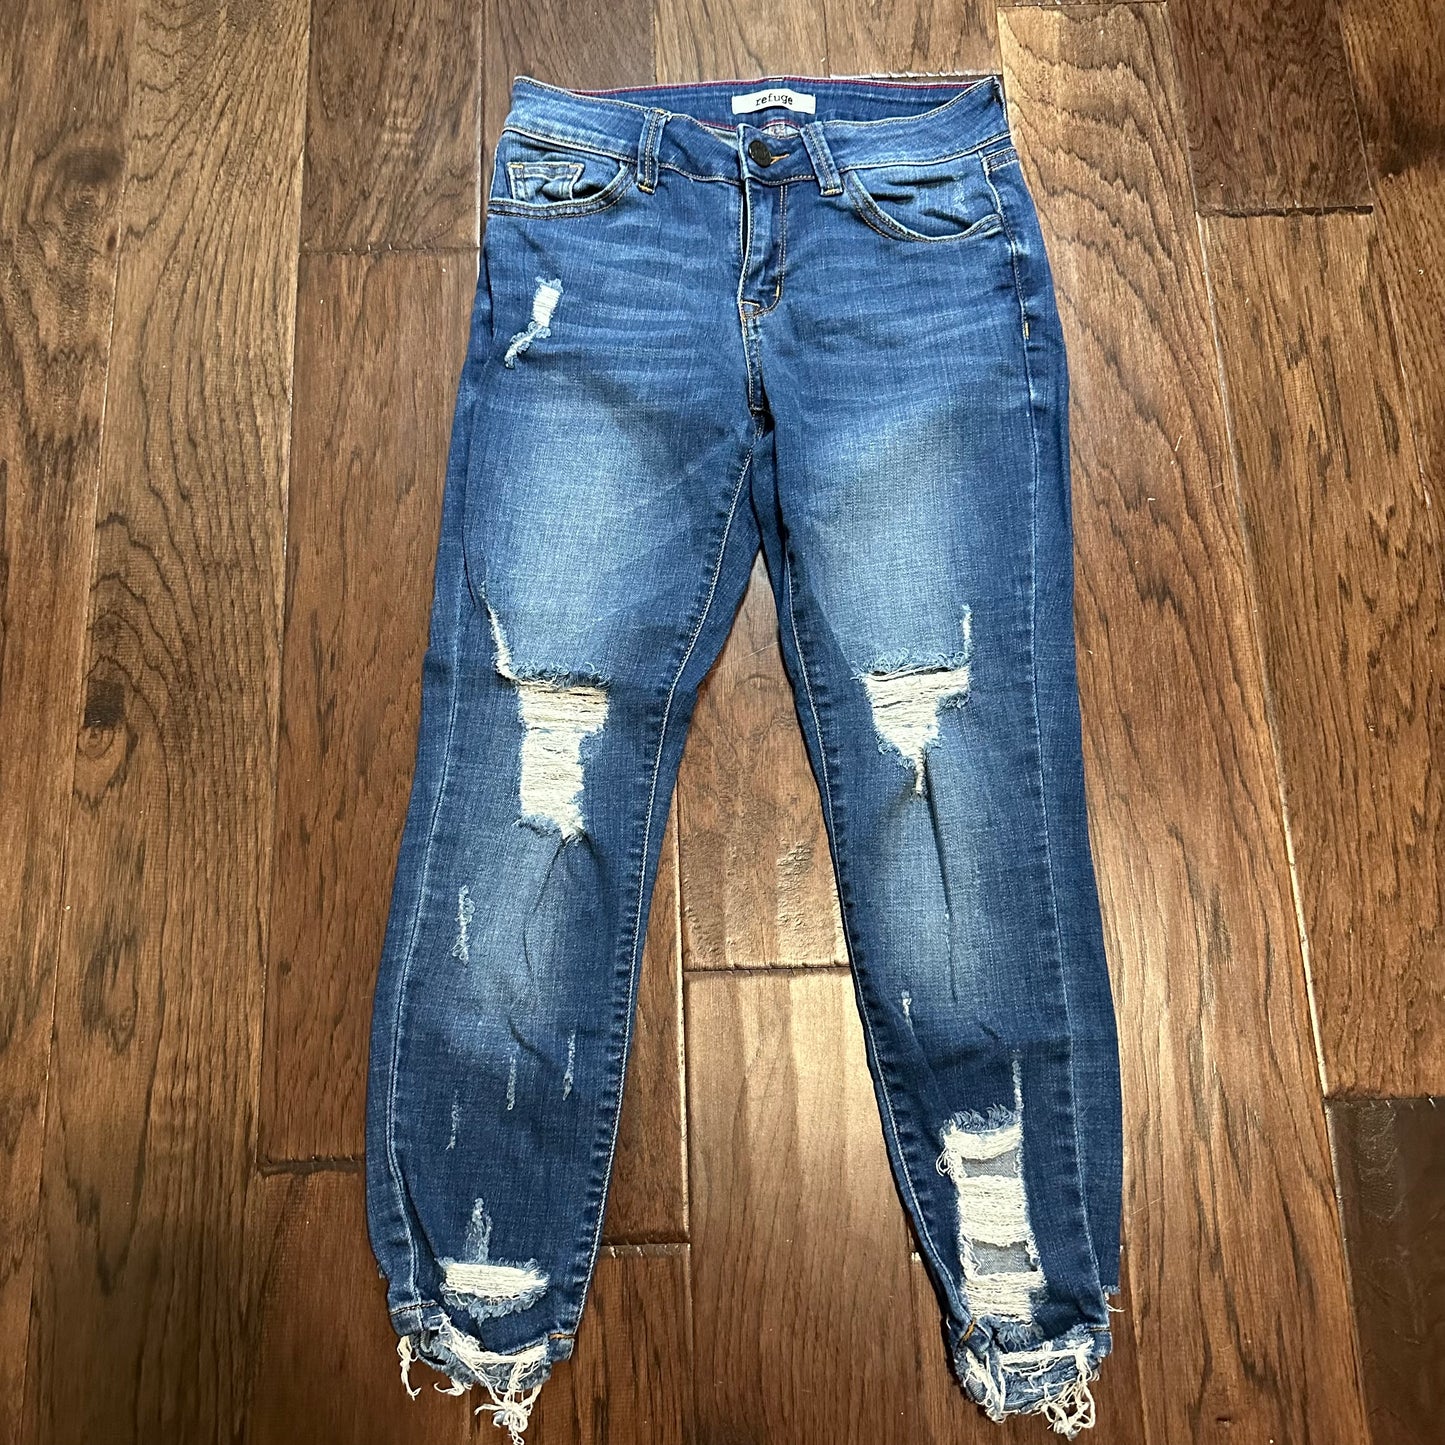 Refuge Ripped Jeans - size 0